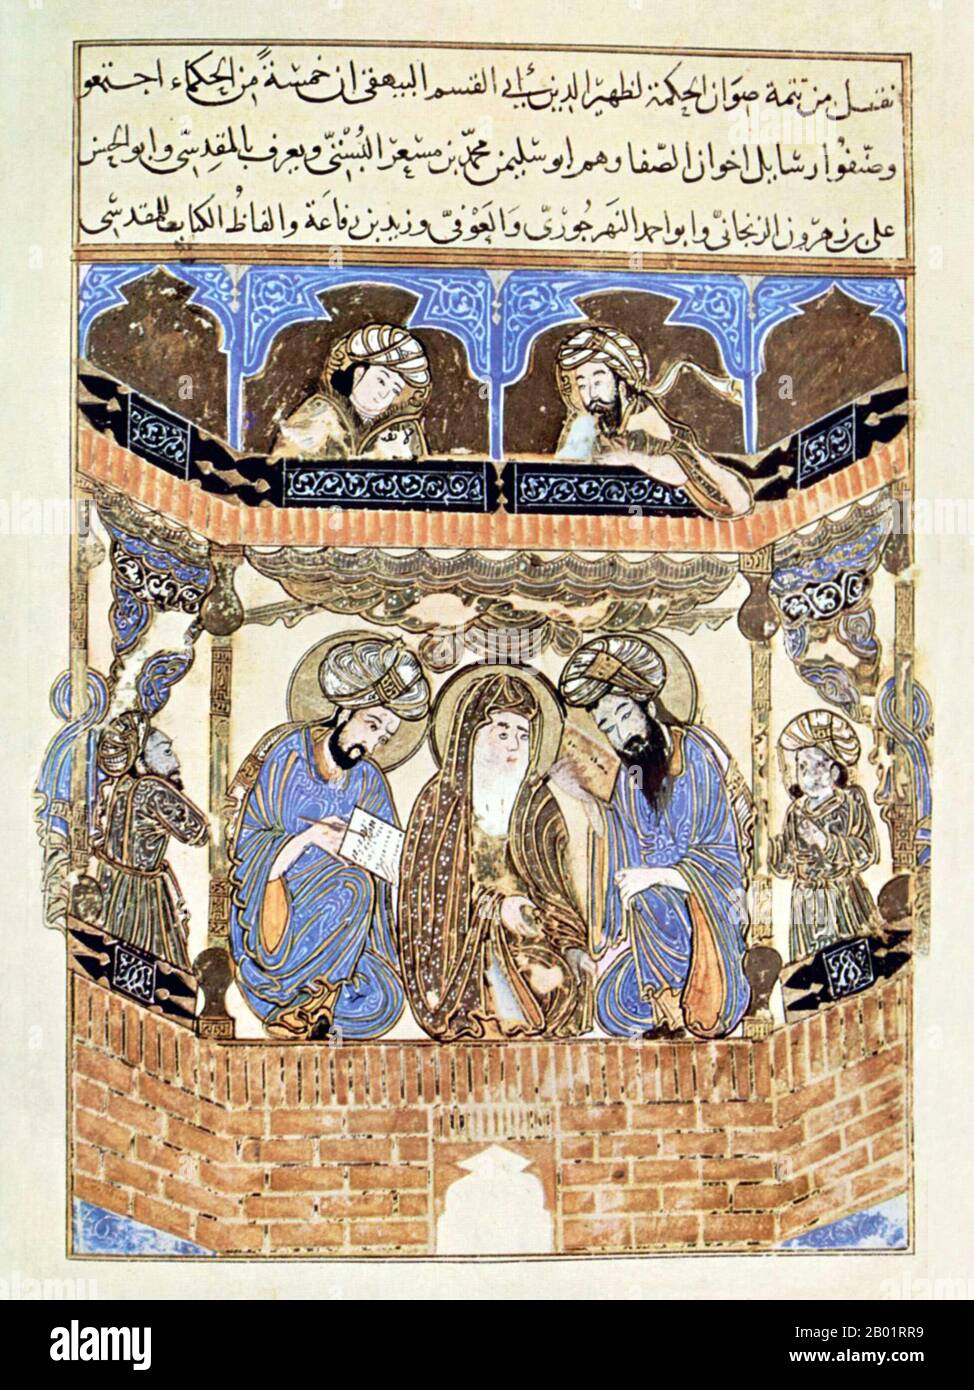 Iraq: Right half of double-leaf frontispiece 'The Epistles of the Brethren of Purity. Arabic illumination, c. 1287.  The Brethren of Purity (transliteration: Ikhwan al-Safa; also in English: The Brethren of Sincerity) were a secret society of Muslim philosophers in Basra, Iraq, in the 10th century CE.  The structure of this mysterious organisation and the identities of its members have never been clear. Their esoteric teachings and philosophy are expounded in an epistolary style in the Encyclopedia of the Brethren of Purity (Arabic: Rasa'il Ikhwan al-safa'), a giant compendium of 52 epistles. Stock Photo